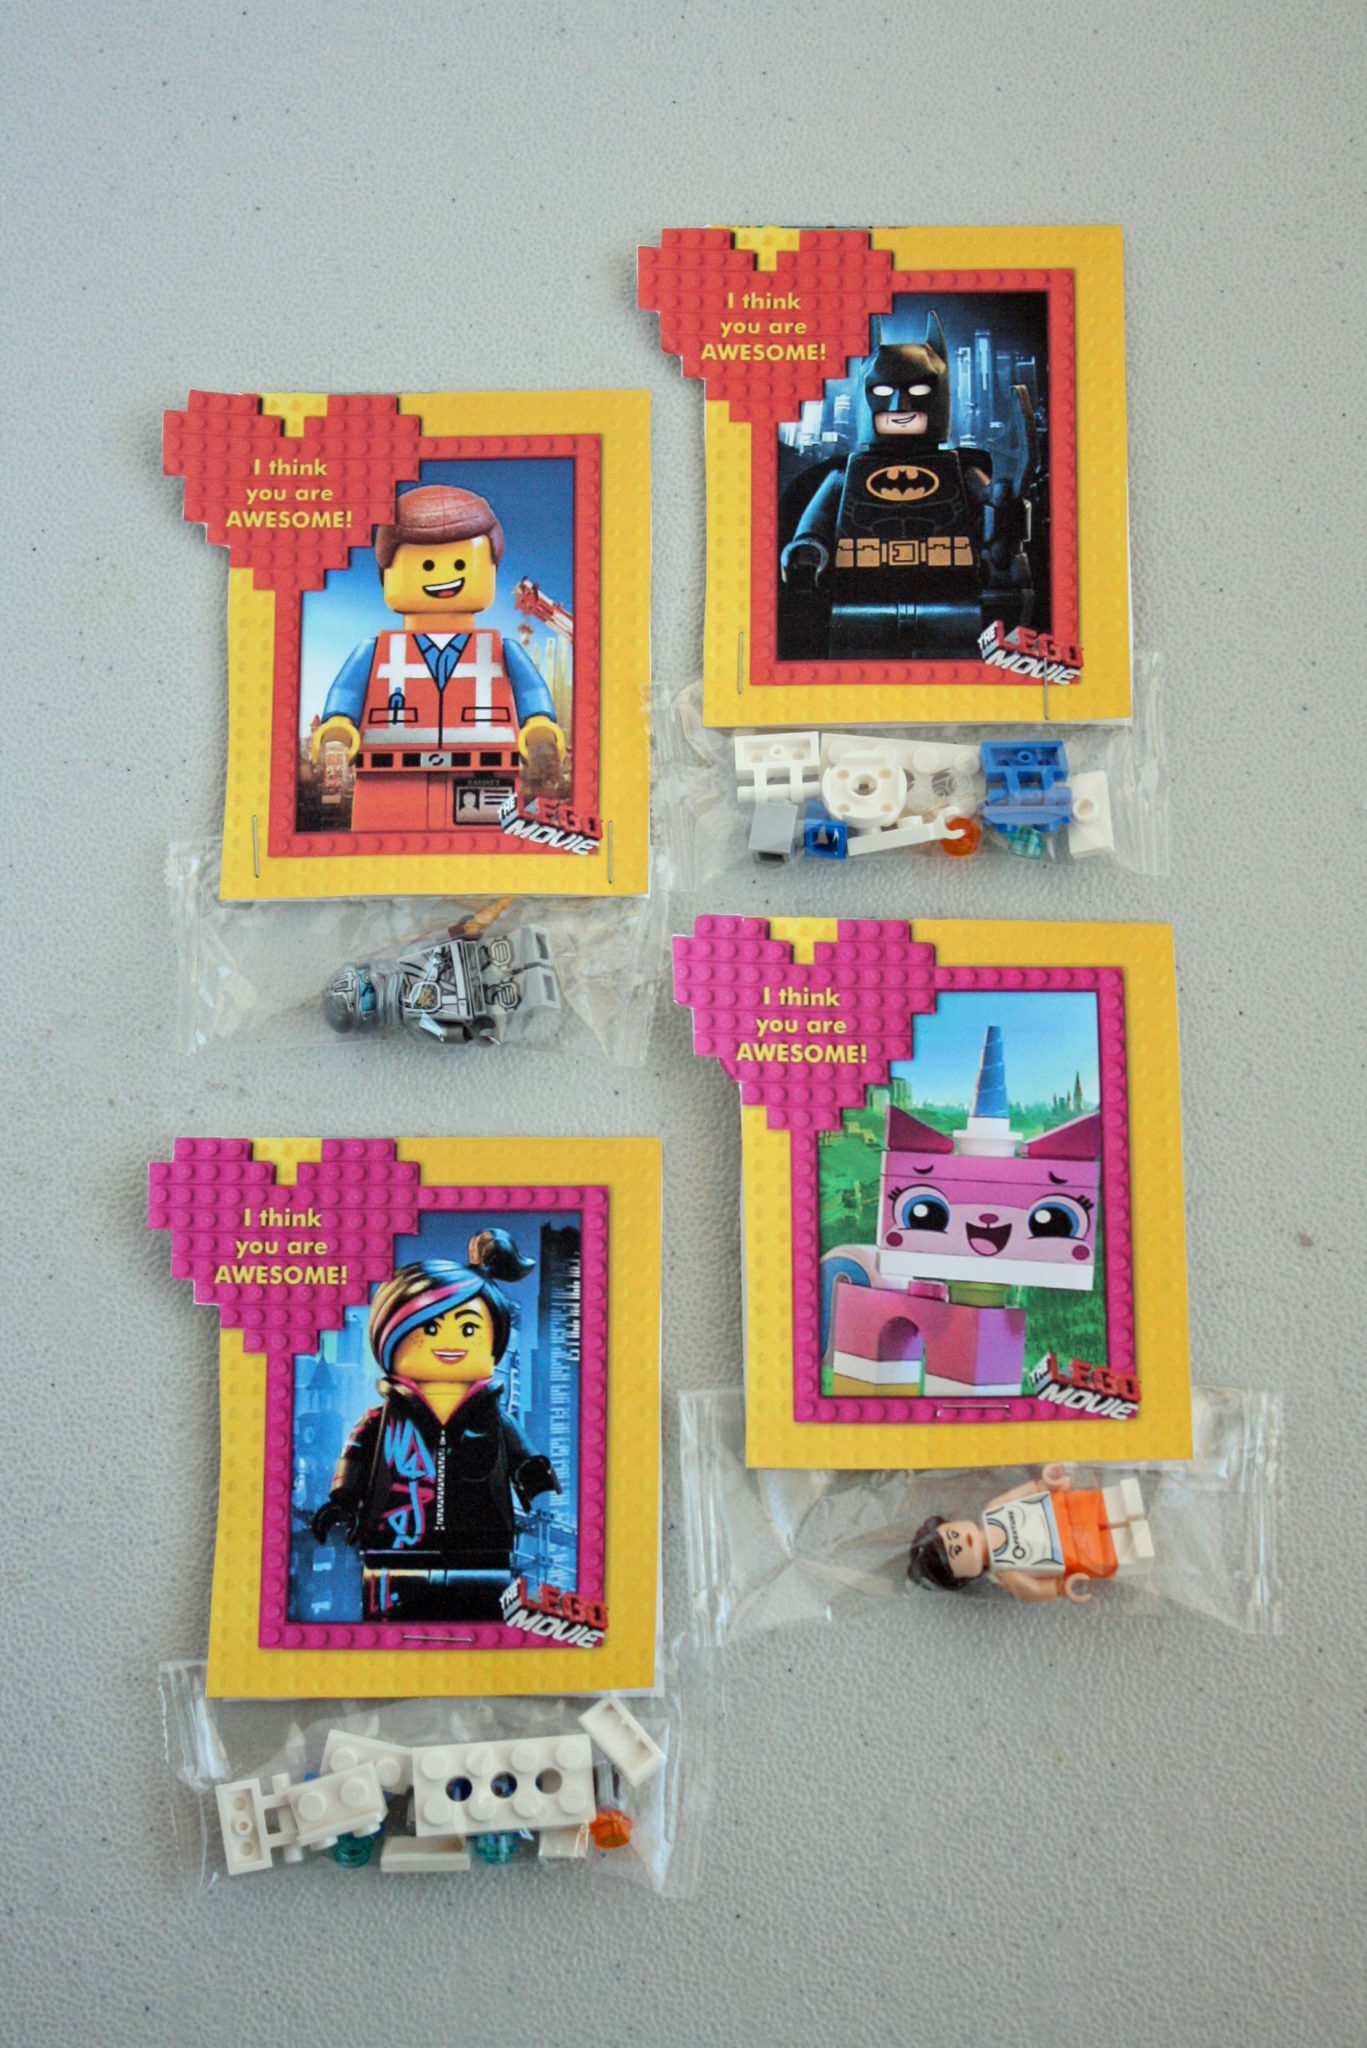 These awesome LEGO movie valentines cards are perfect for your children to pass out to friends in their classroom. Add a creative DIY touch by attaching some LEGO bricks or other Lego favors like minifigures. Lego Printable Valentines | LEGO Valentines Cards